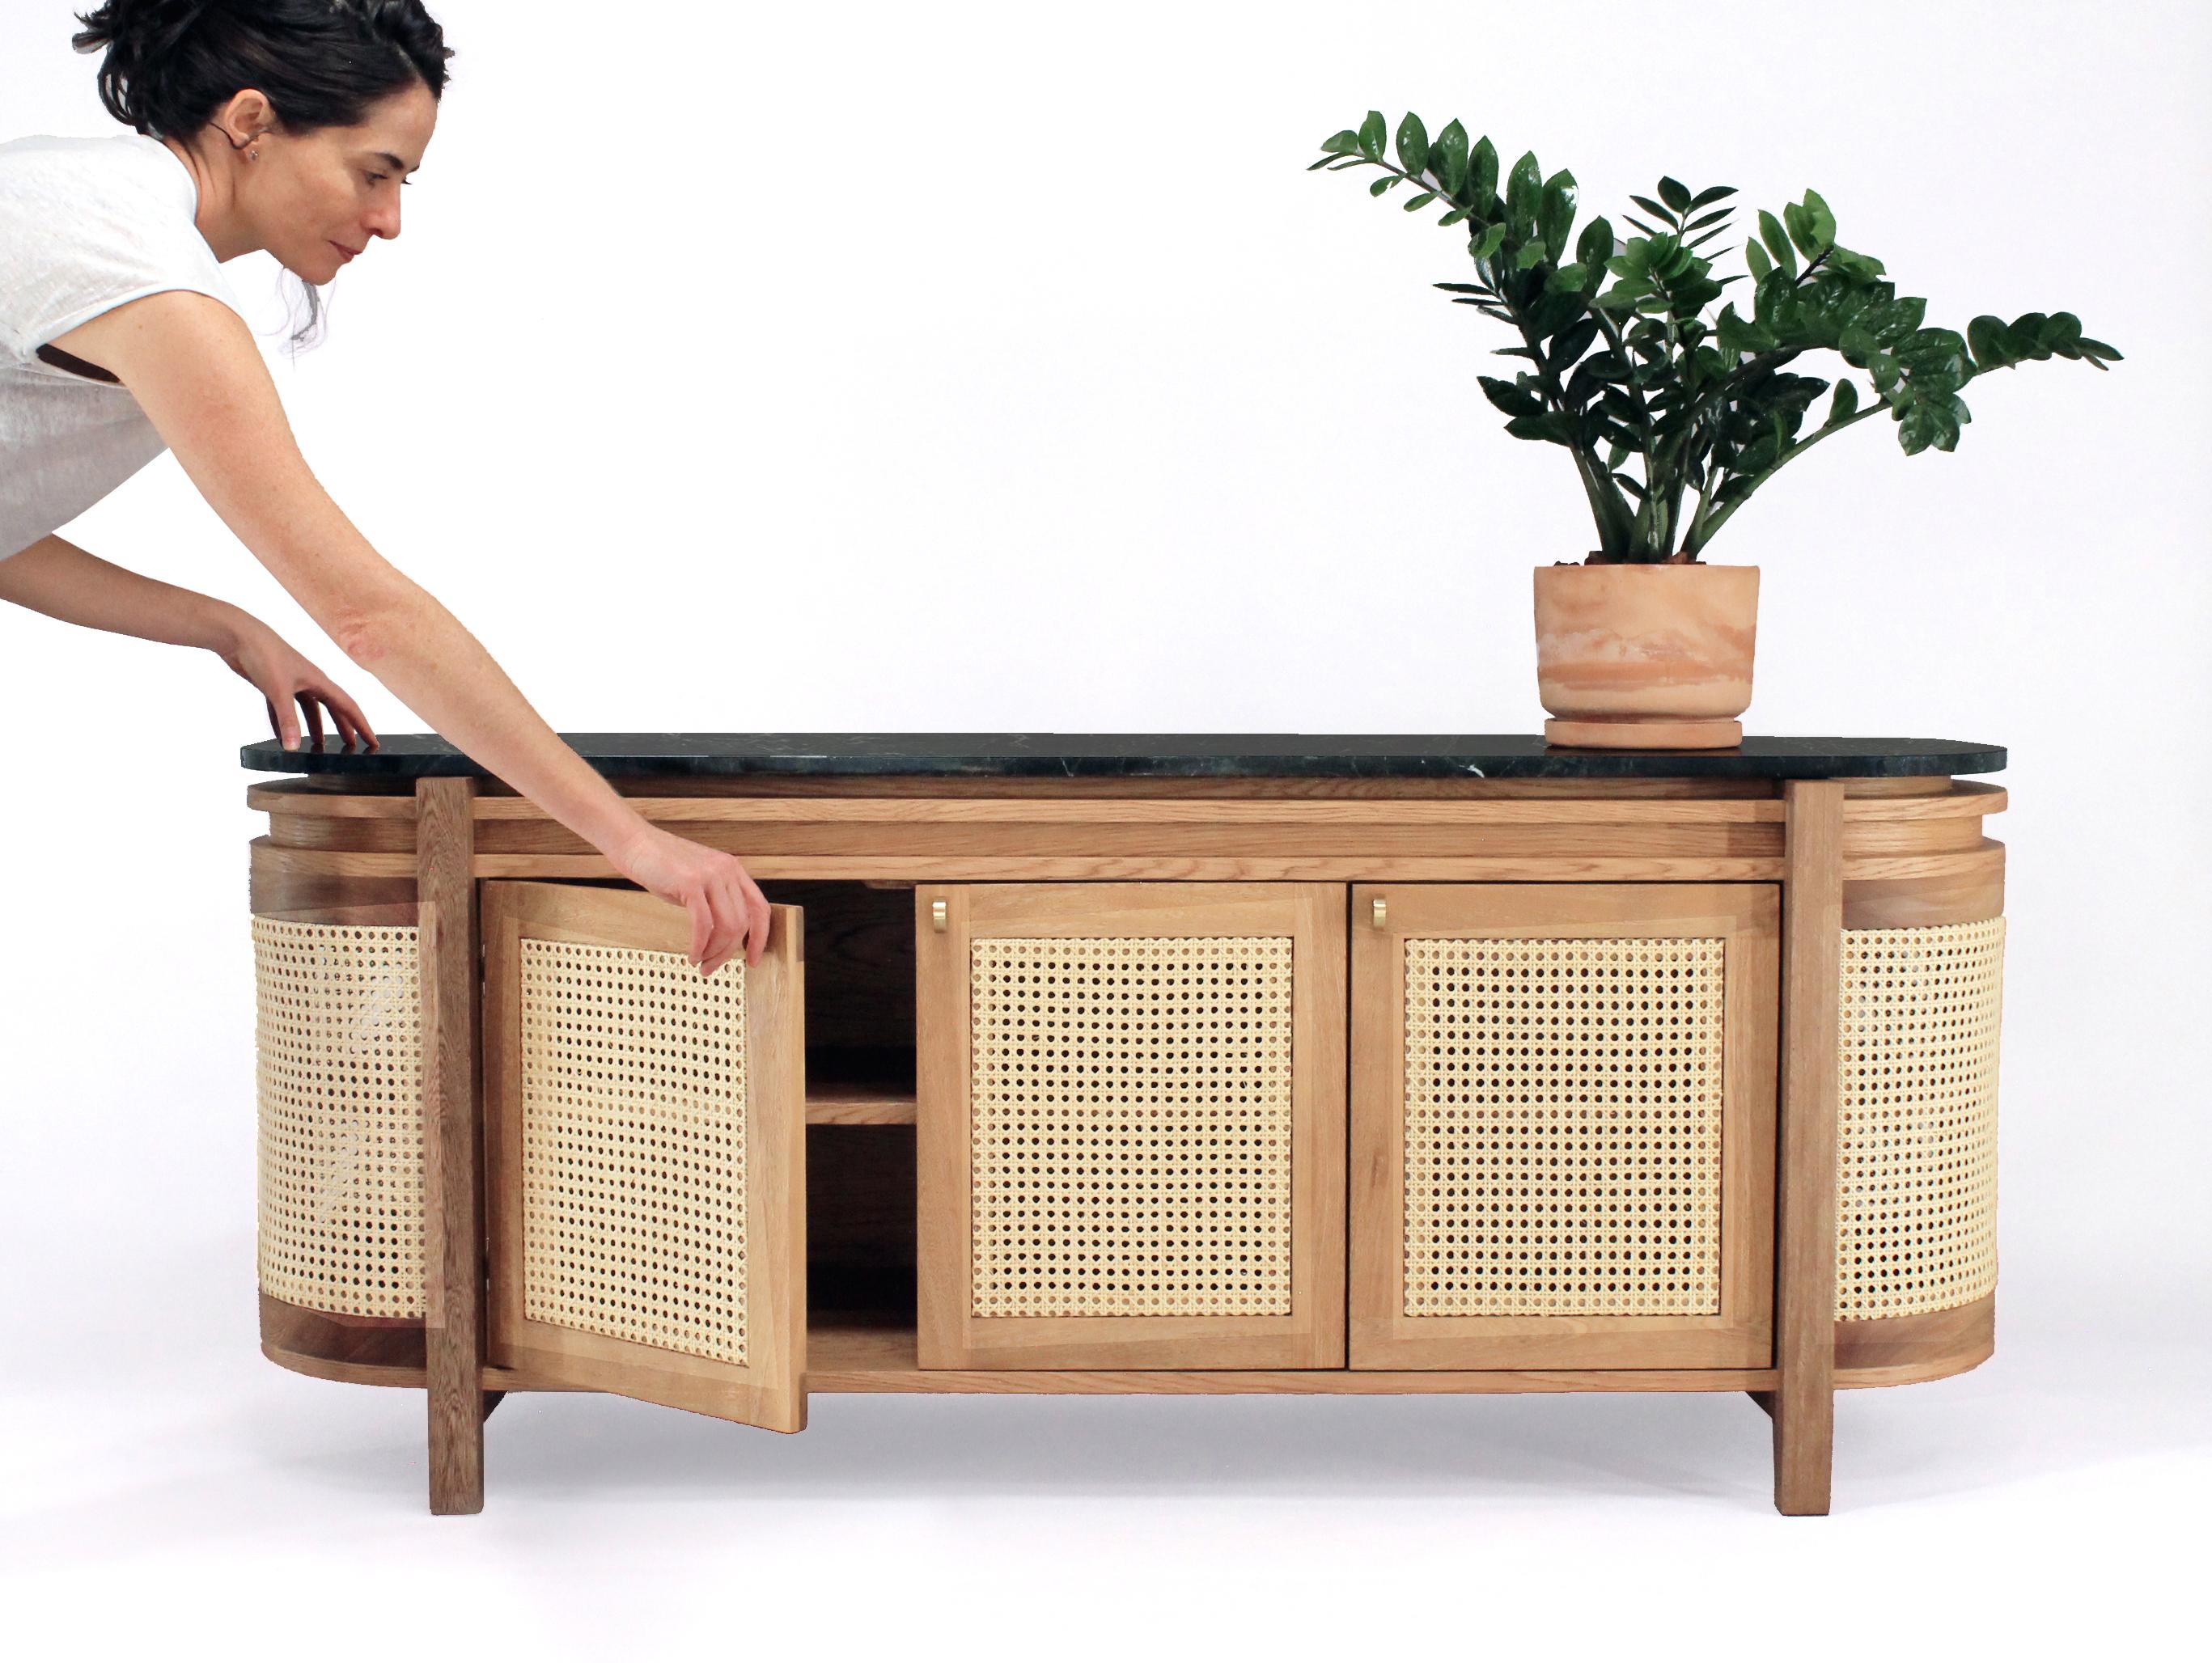 Modern Av. Mexico Sideboard, Wicker and Oak with Marble, Mexican Design 160 cm